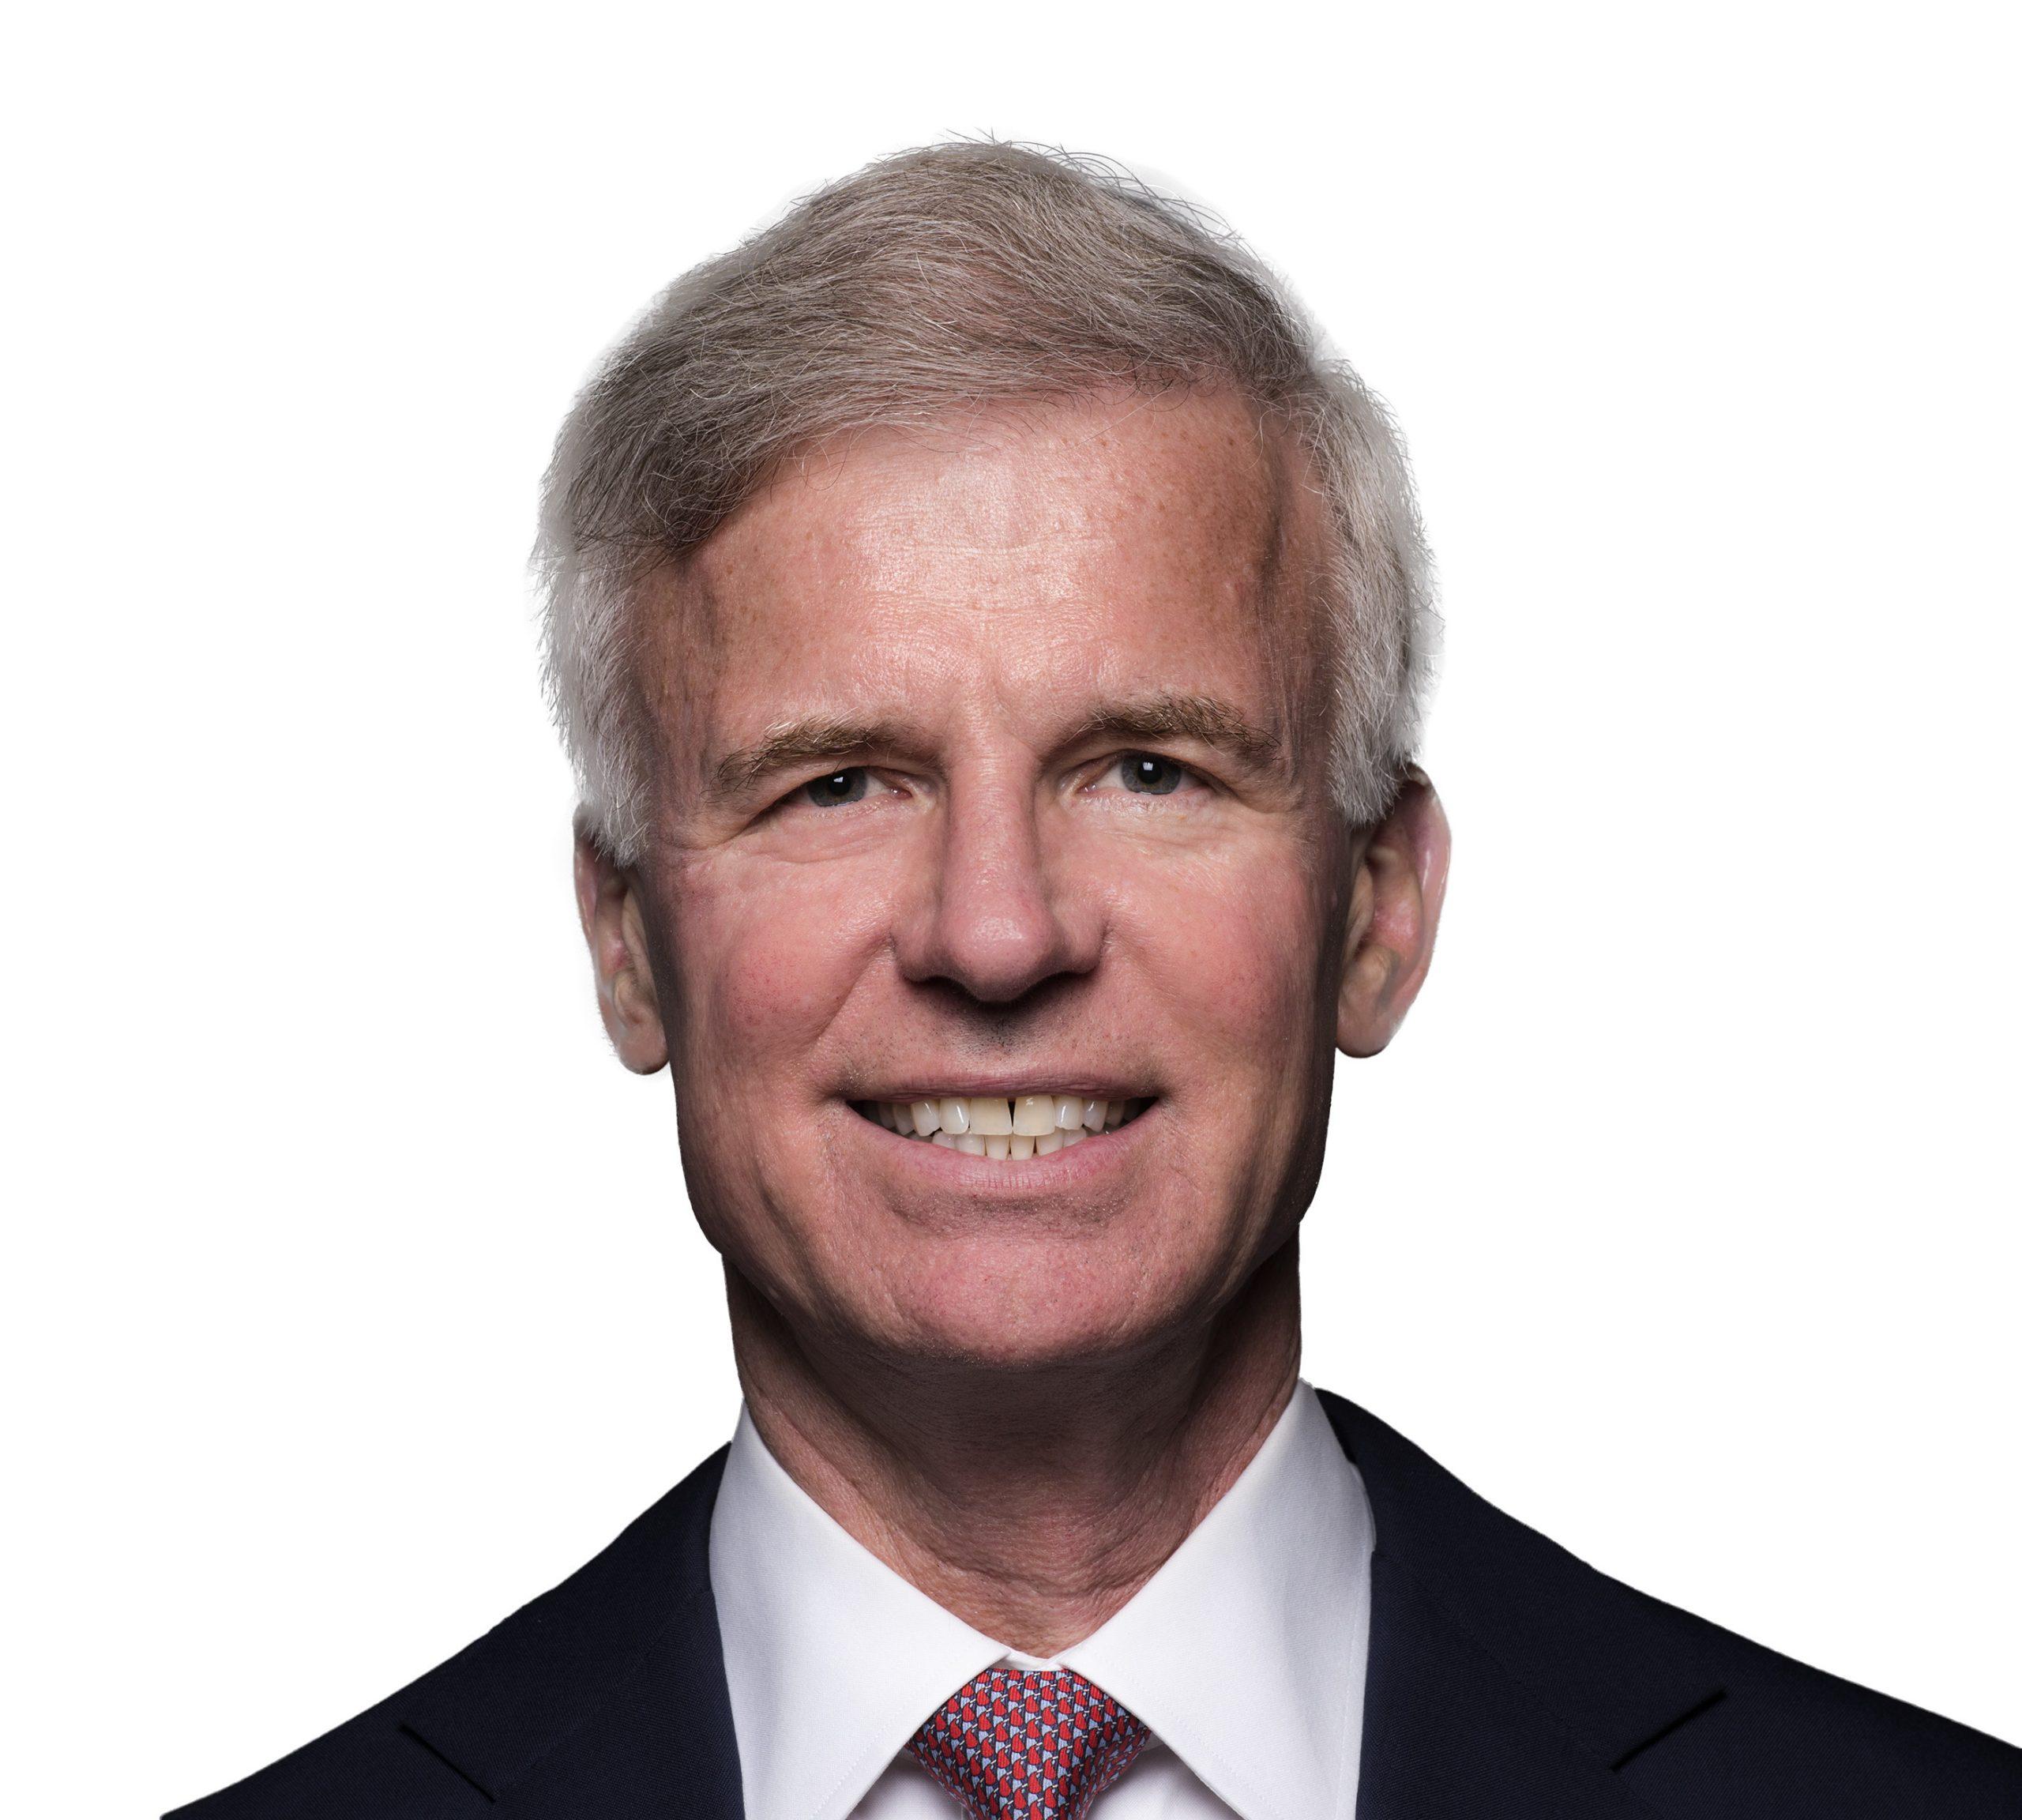 WASHINGTON, DC - JUNE 20:
ID photo for Fred Ryan, Washington Post Publisher and C.E.O., on June, 20, 2017 in Washington, DC.
(Photo by Bill OLeary/The Washington Post)